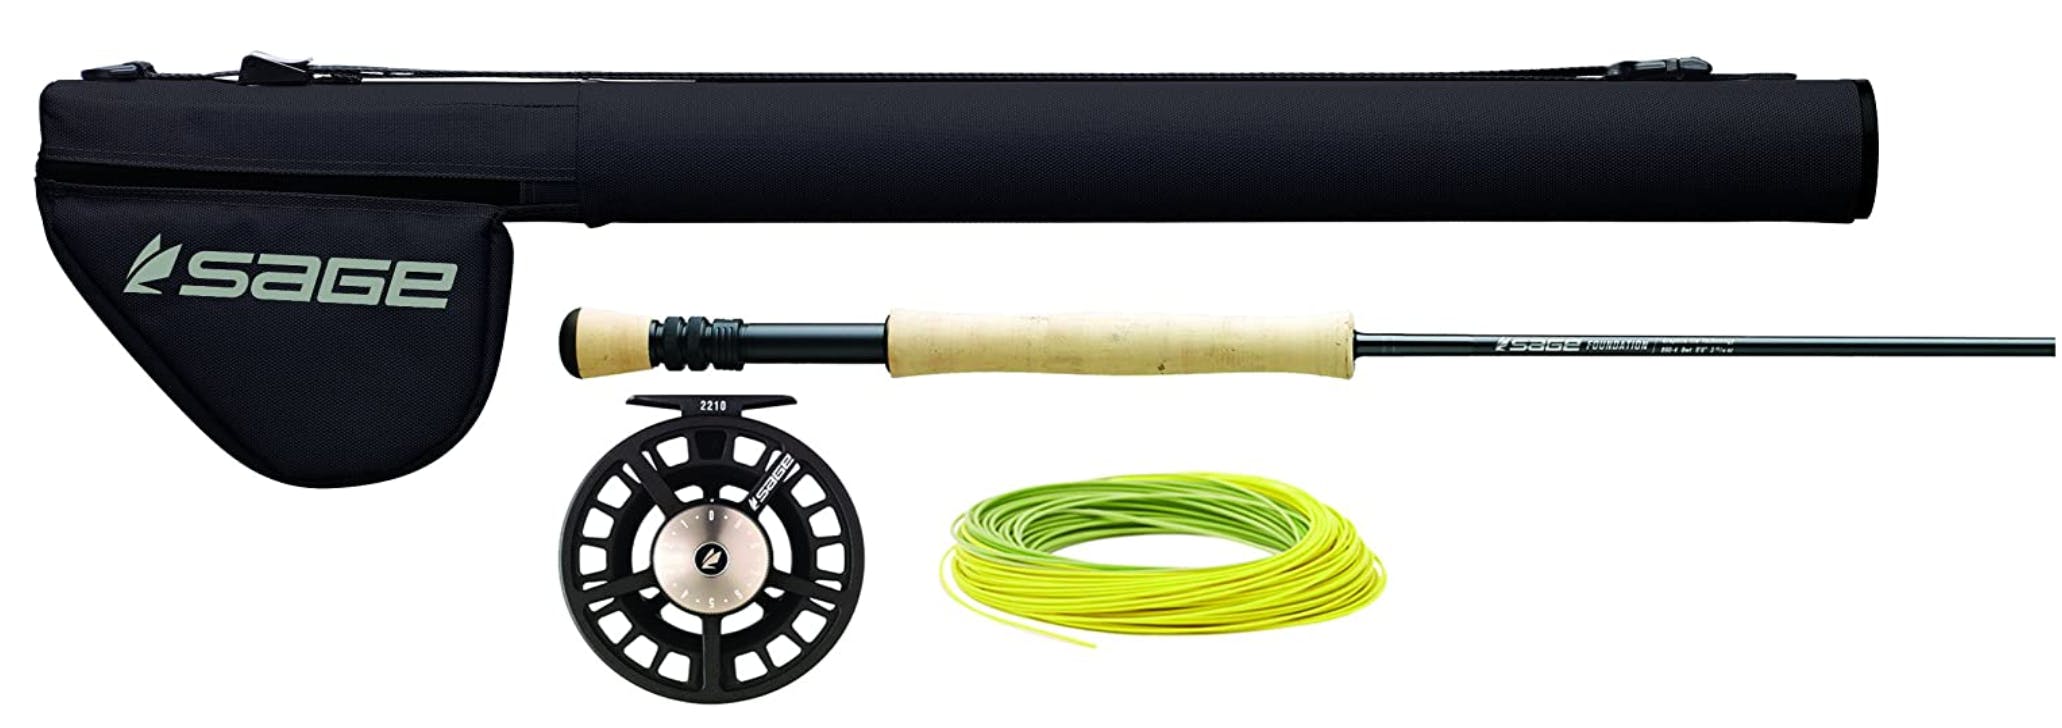 The Sage Foundation Fly Rod Outfit. 